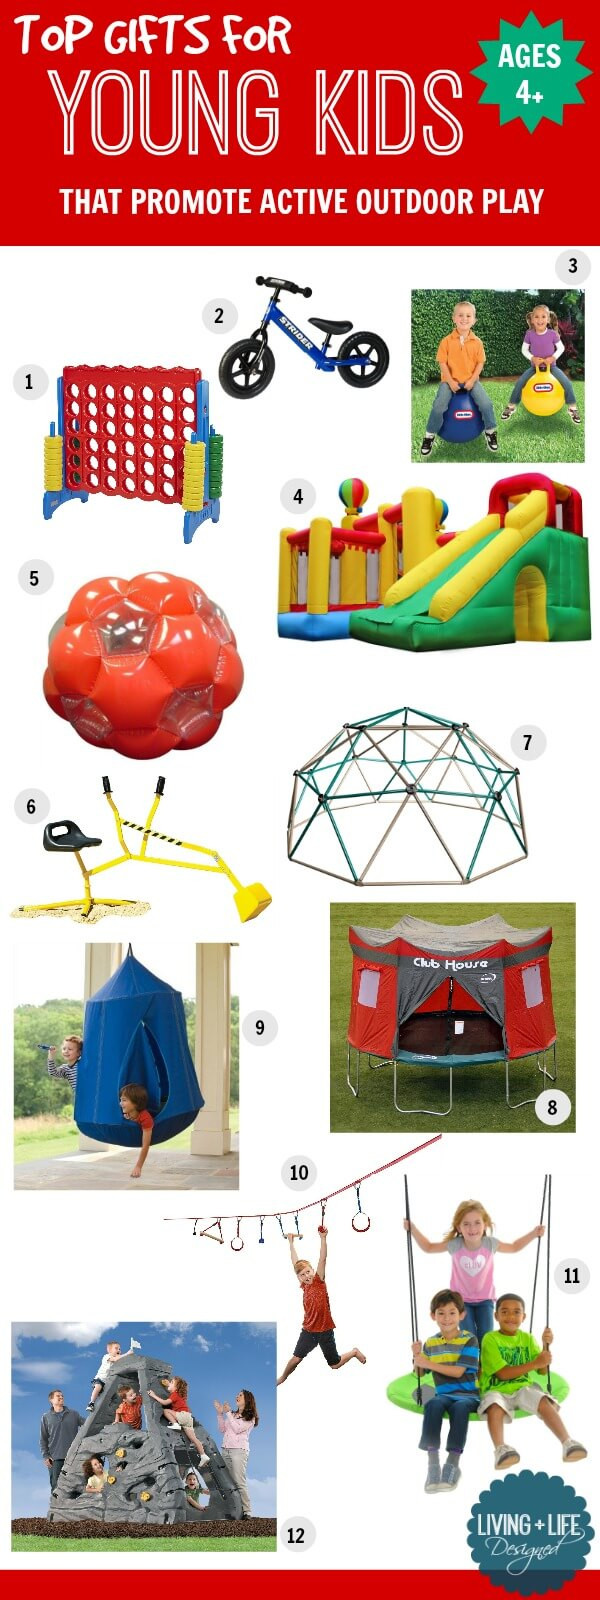 Outdoor Gift Ideas For Boys
 Gift Ideas for Young Kids Ages 4 That Promote Active